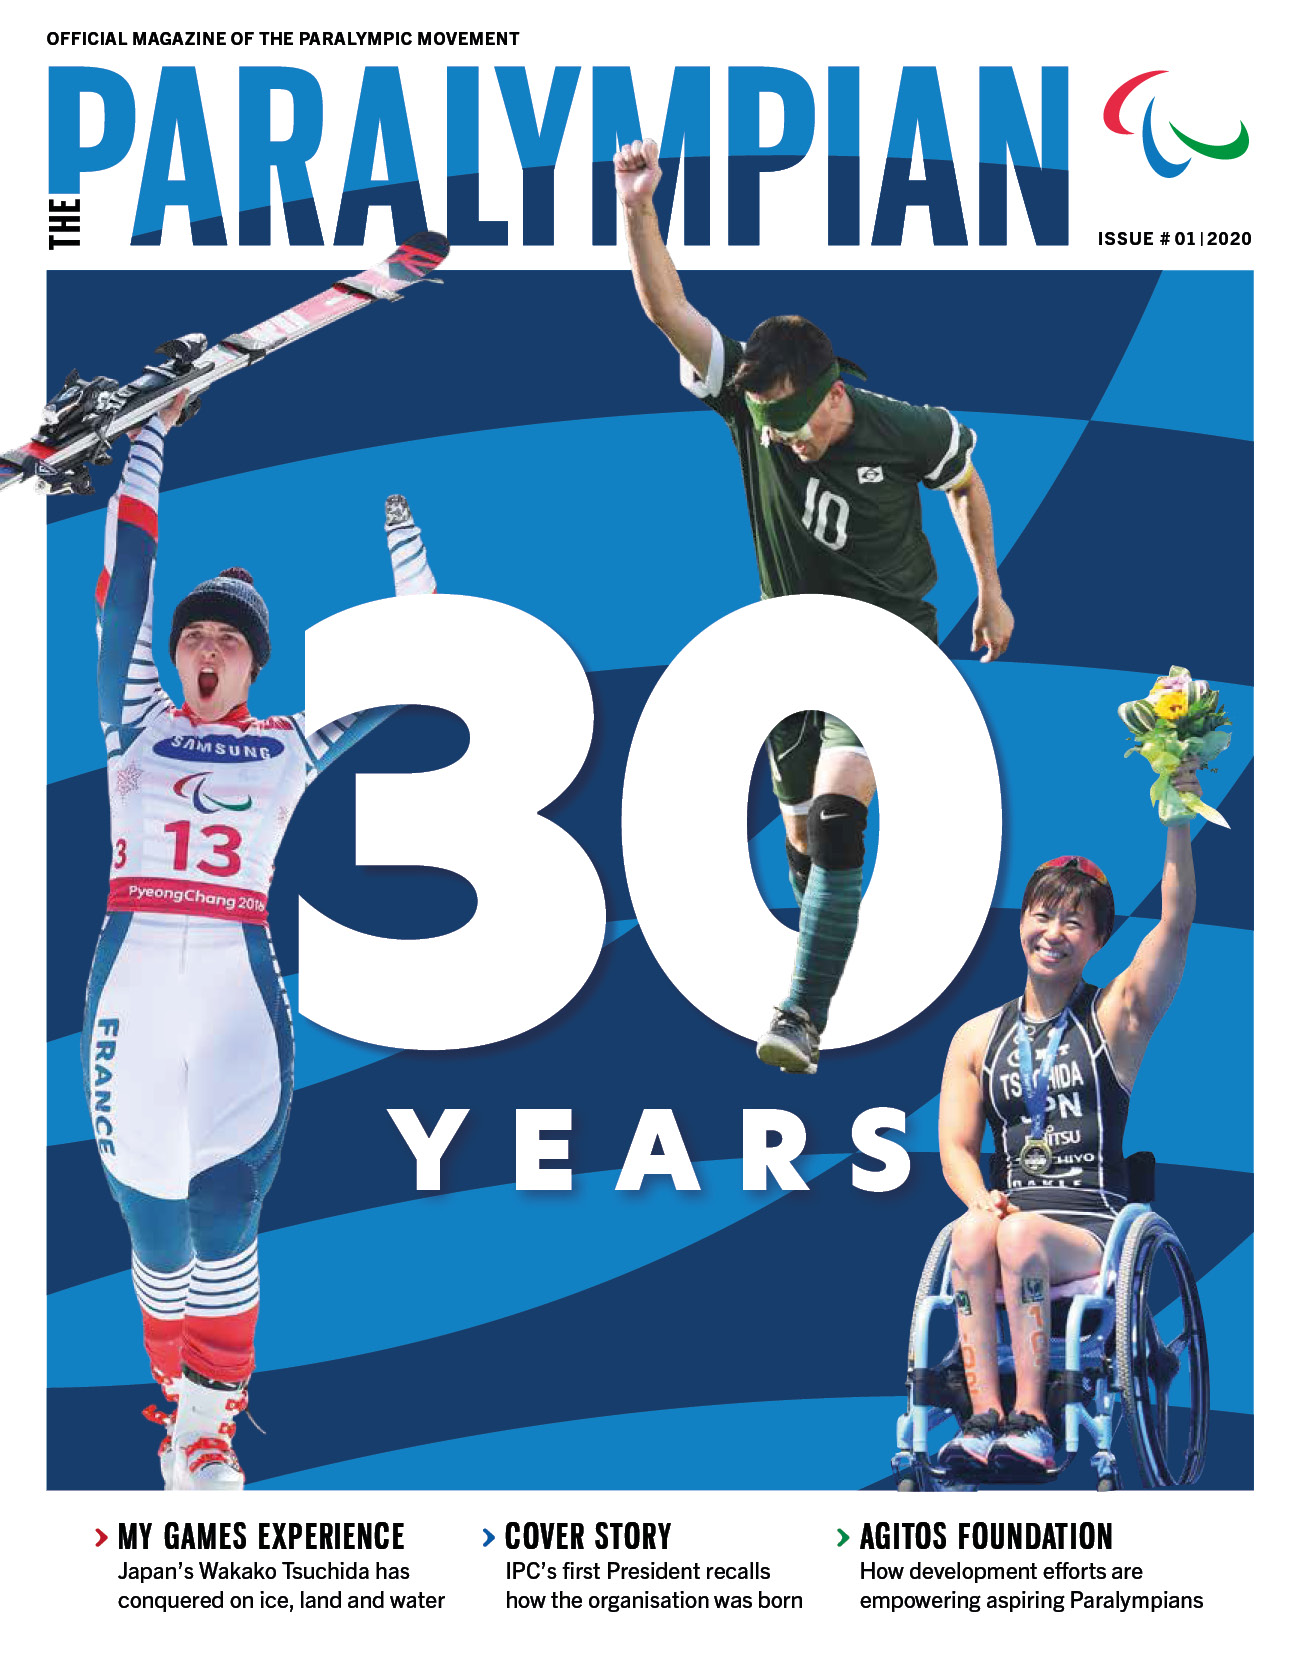 Cover page of The Paralympian magazine with three athletes and big number 30